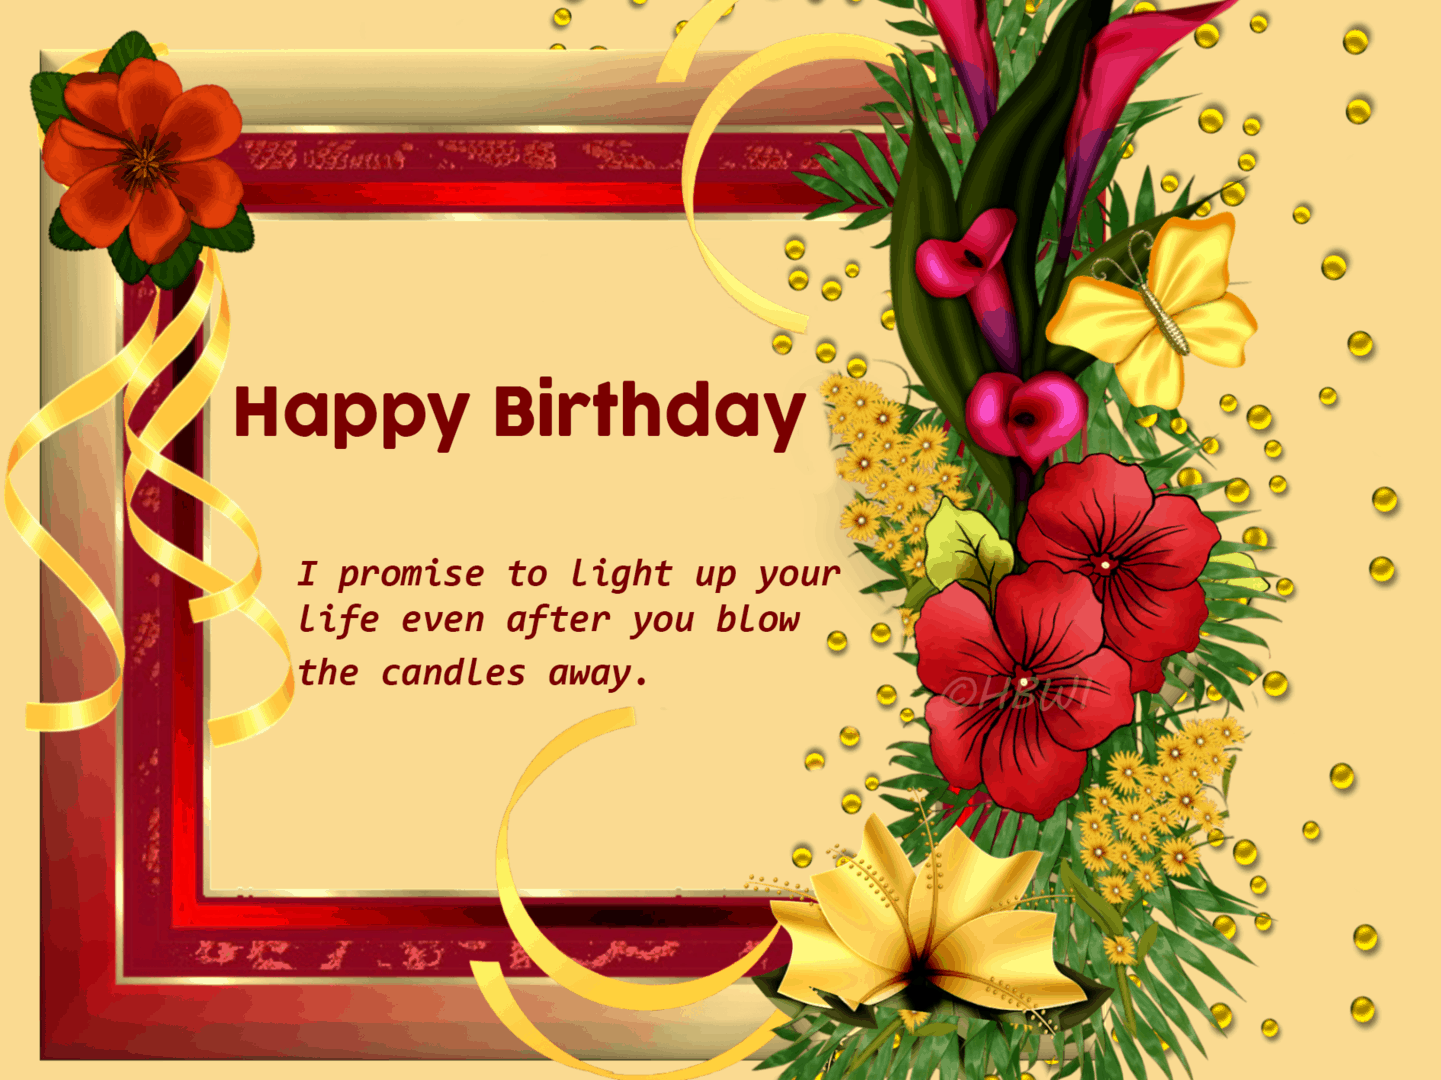 Exclusive Happy birthday wishes cards with flowers